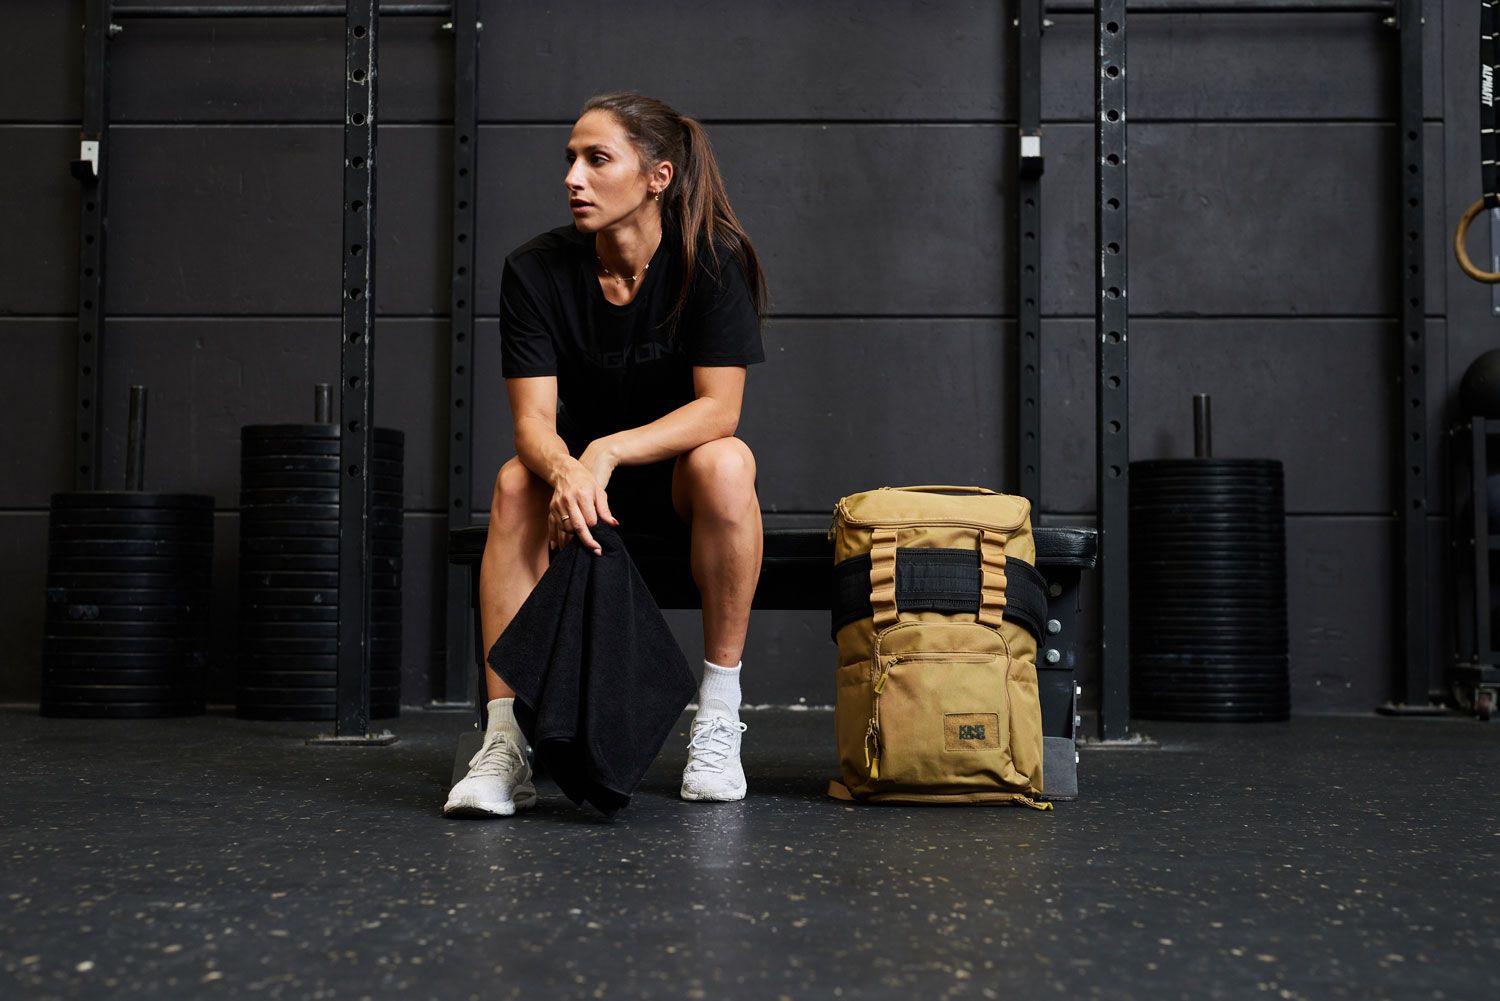 Person with gym bag